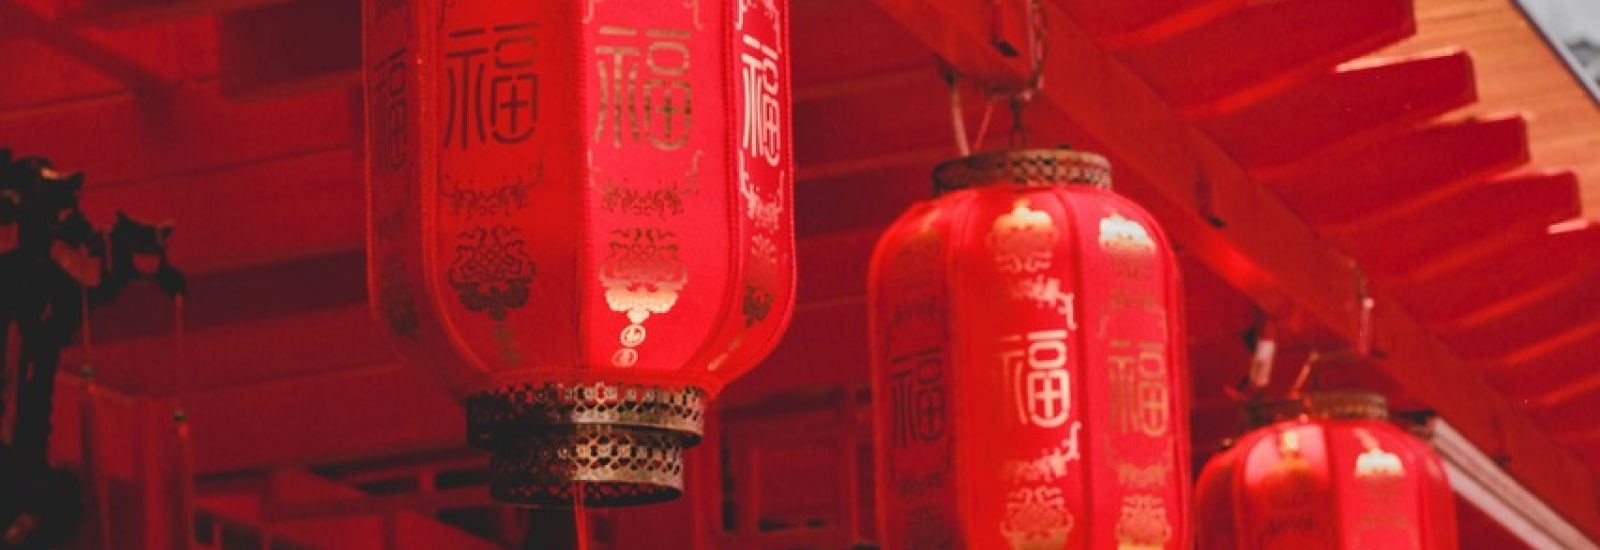 A photograph of a stereotypical Chinese building, with red paper lanterns hanging outside